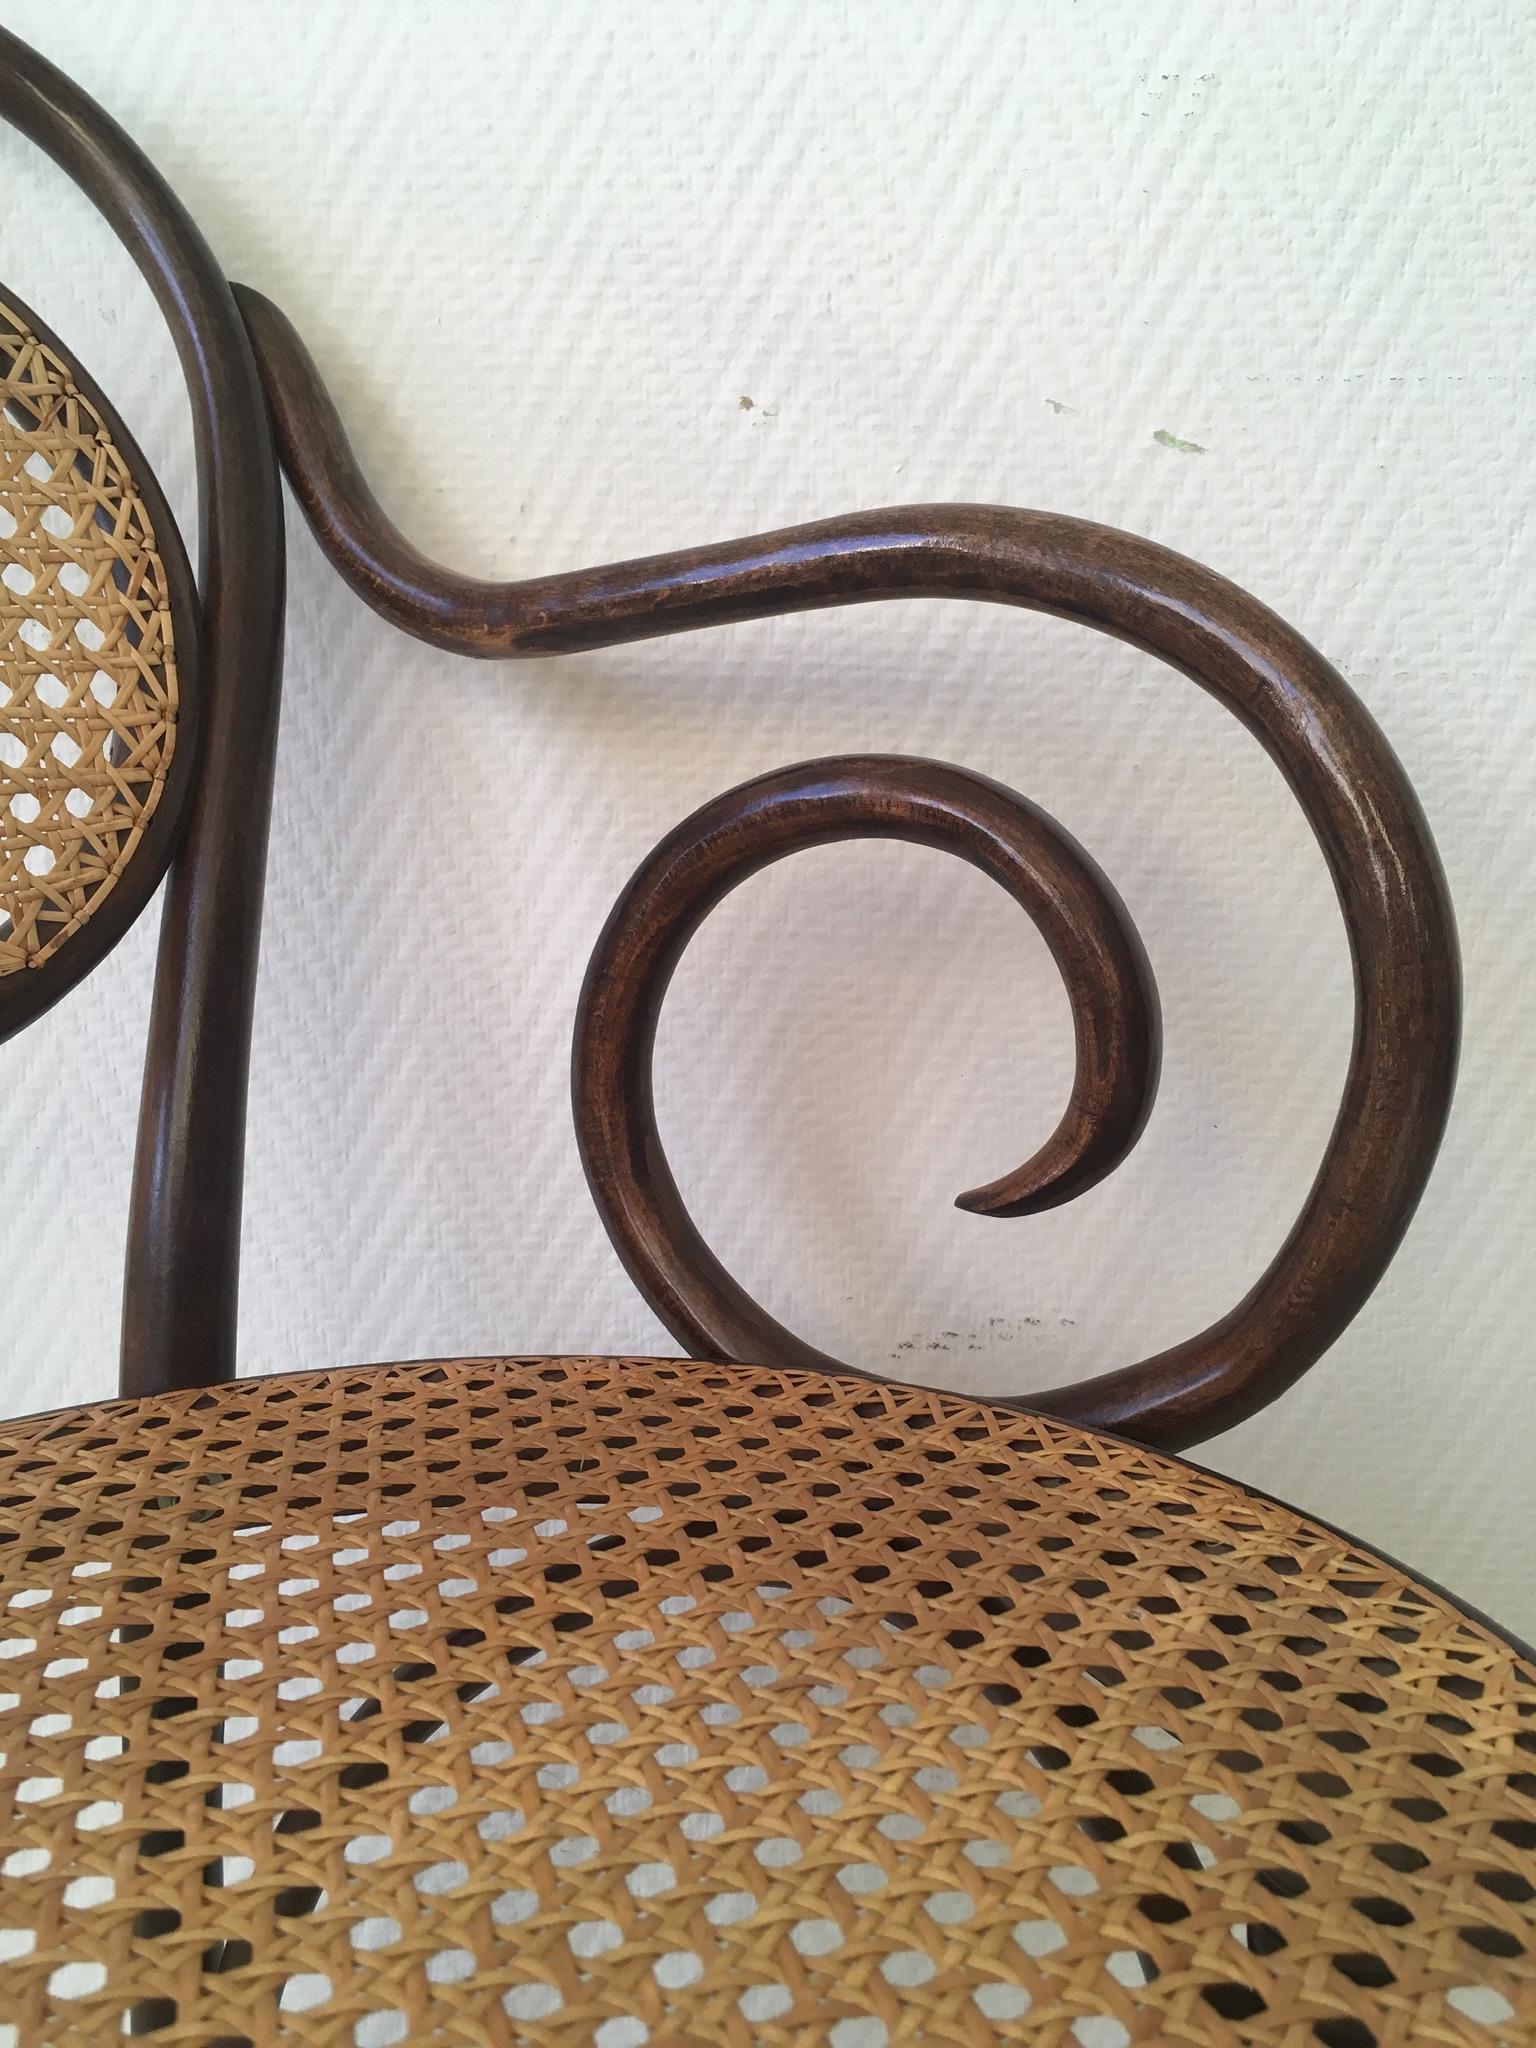 ZPM Radomsko, Former Thonet, No. 11 Bentwood and Rattan Dining Room Chairs 1